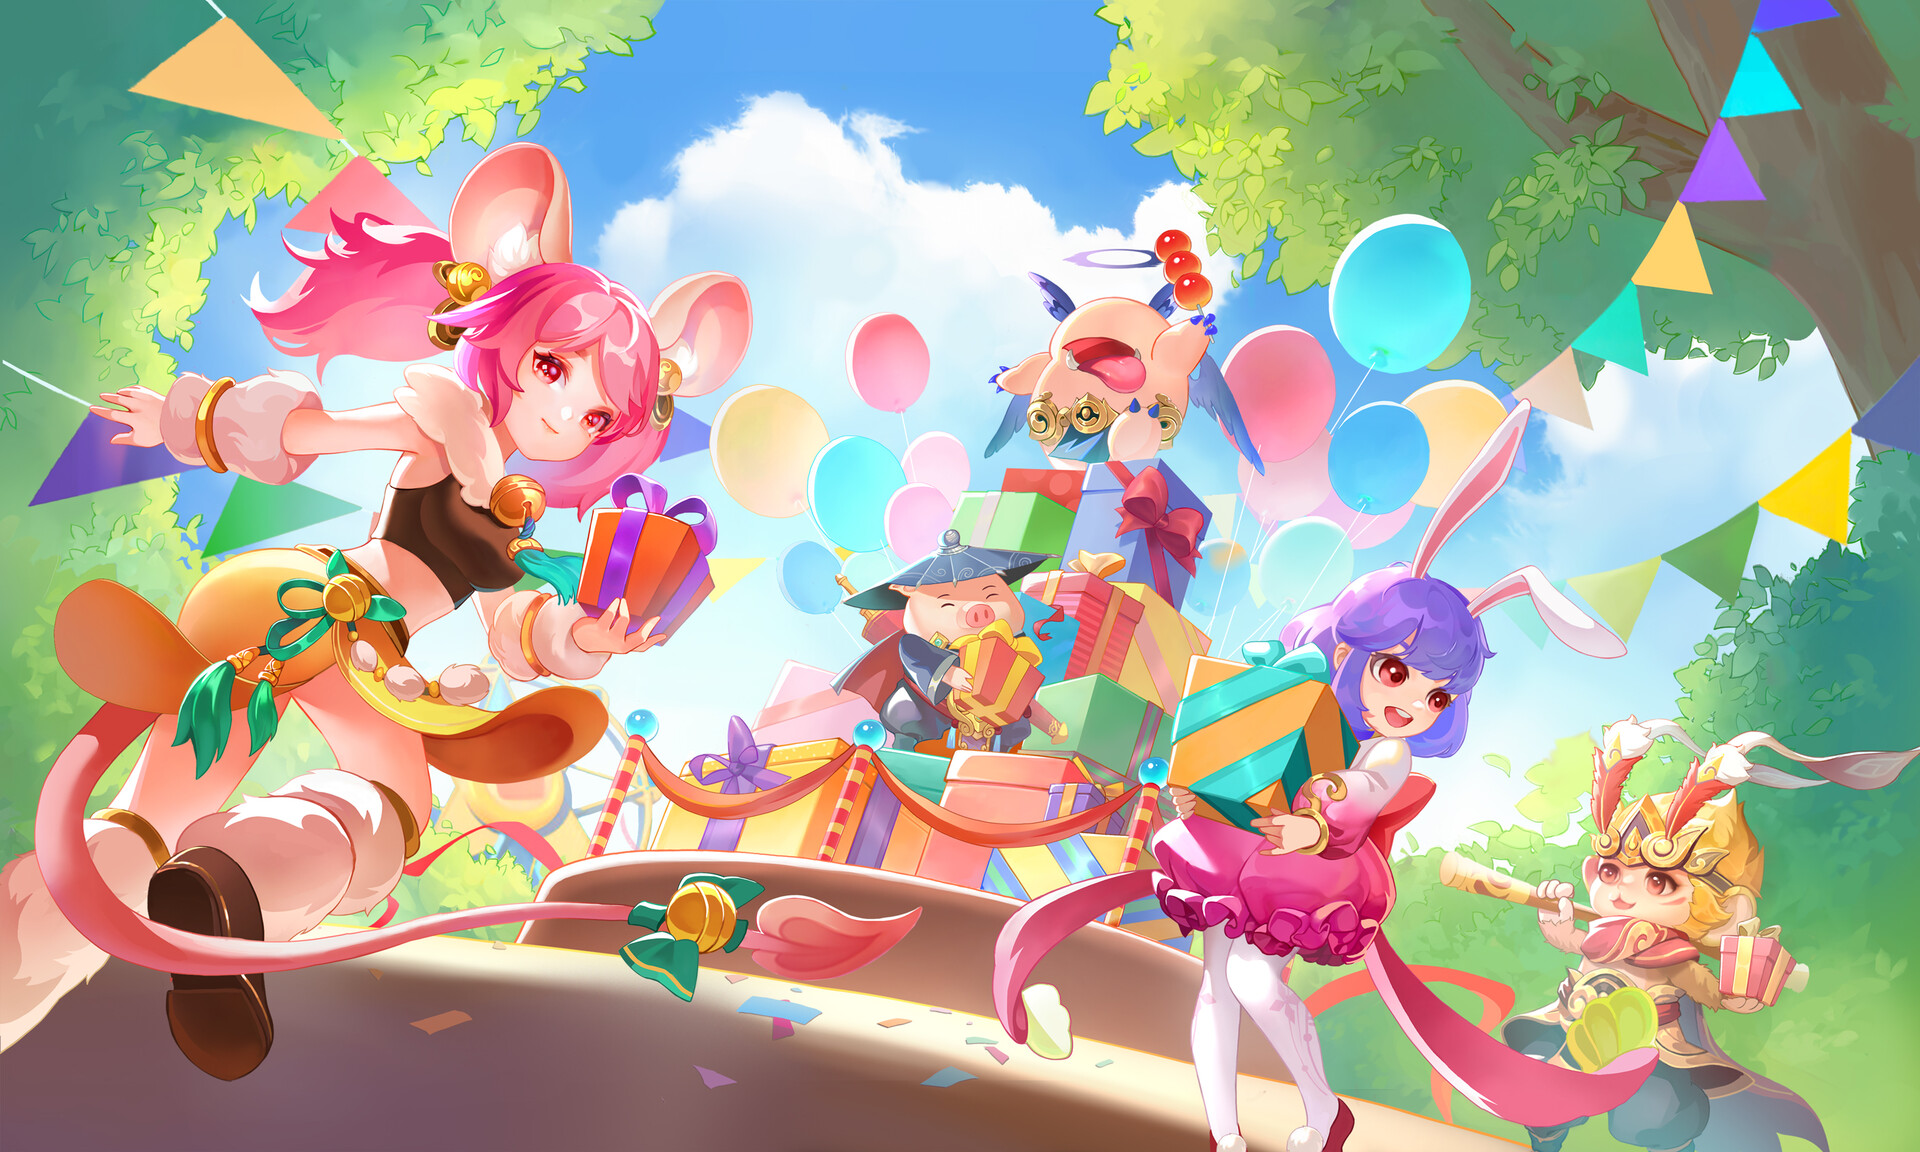 MuSi Drawing Anime Girls Pigs Colorful Balloon Presents Party Balloons Confetti 1920x1152